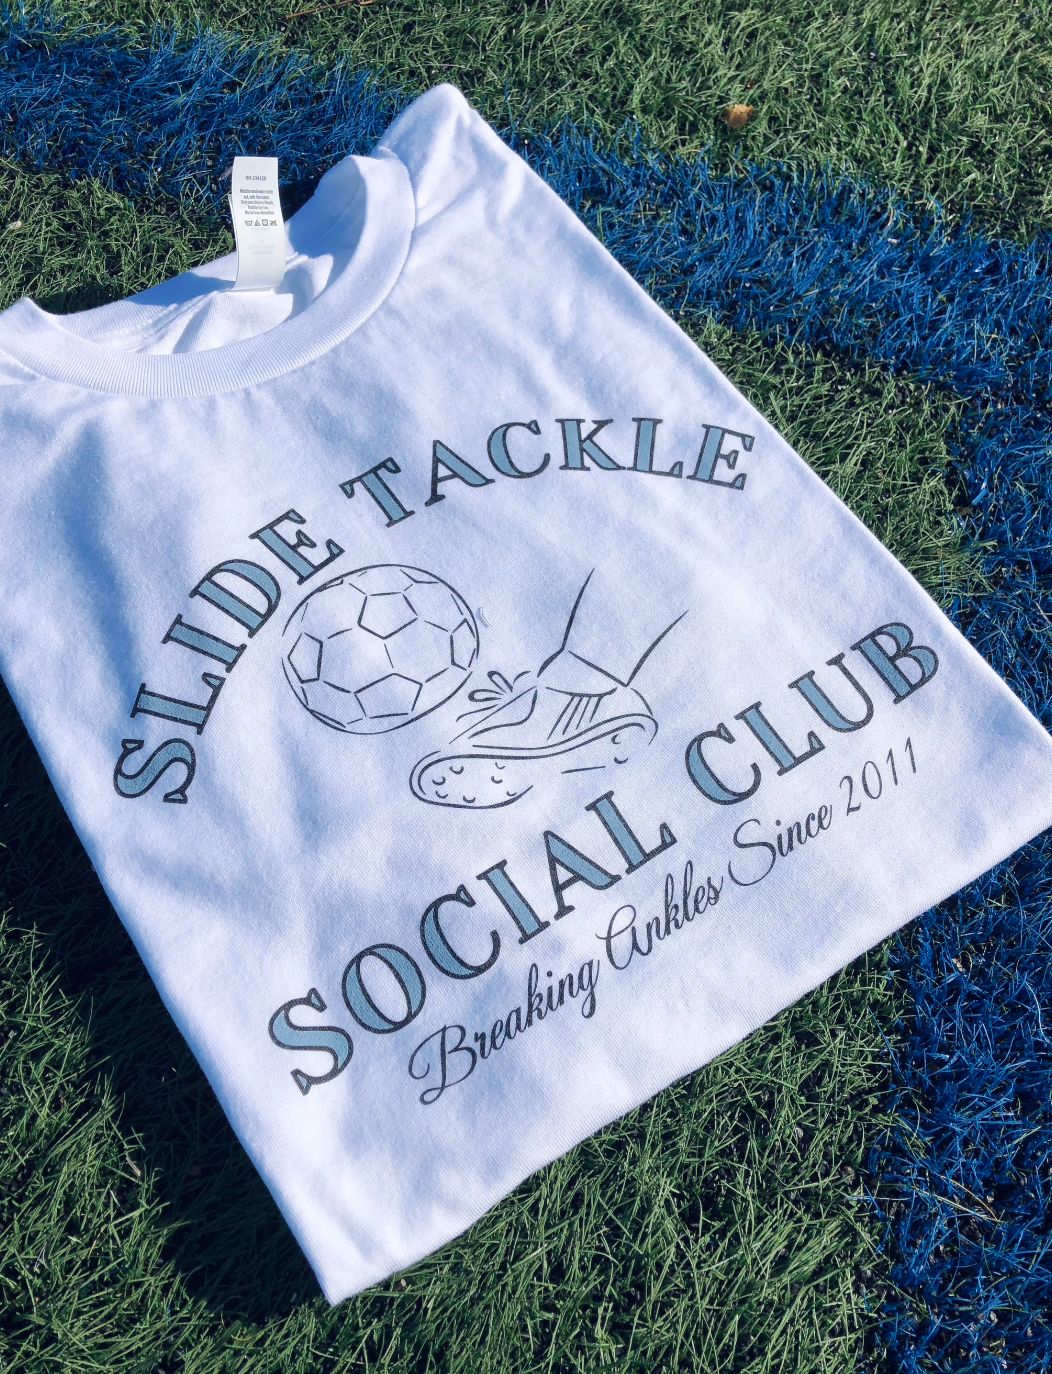 slide tackle social club breaking ankles t-shirt by soccergrlprobs